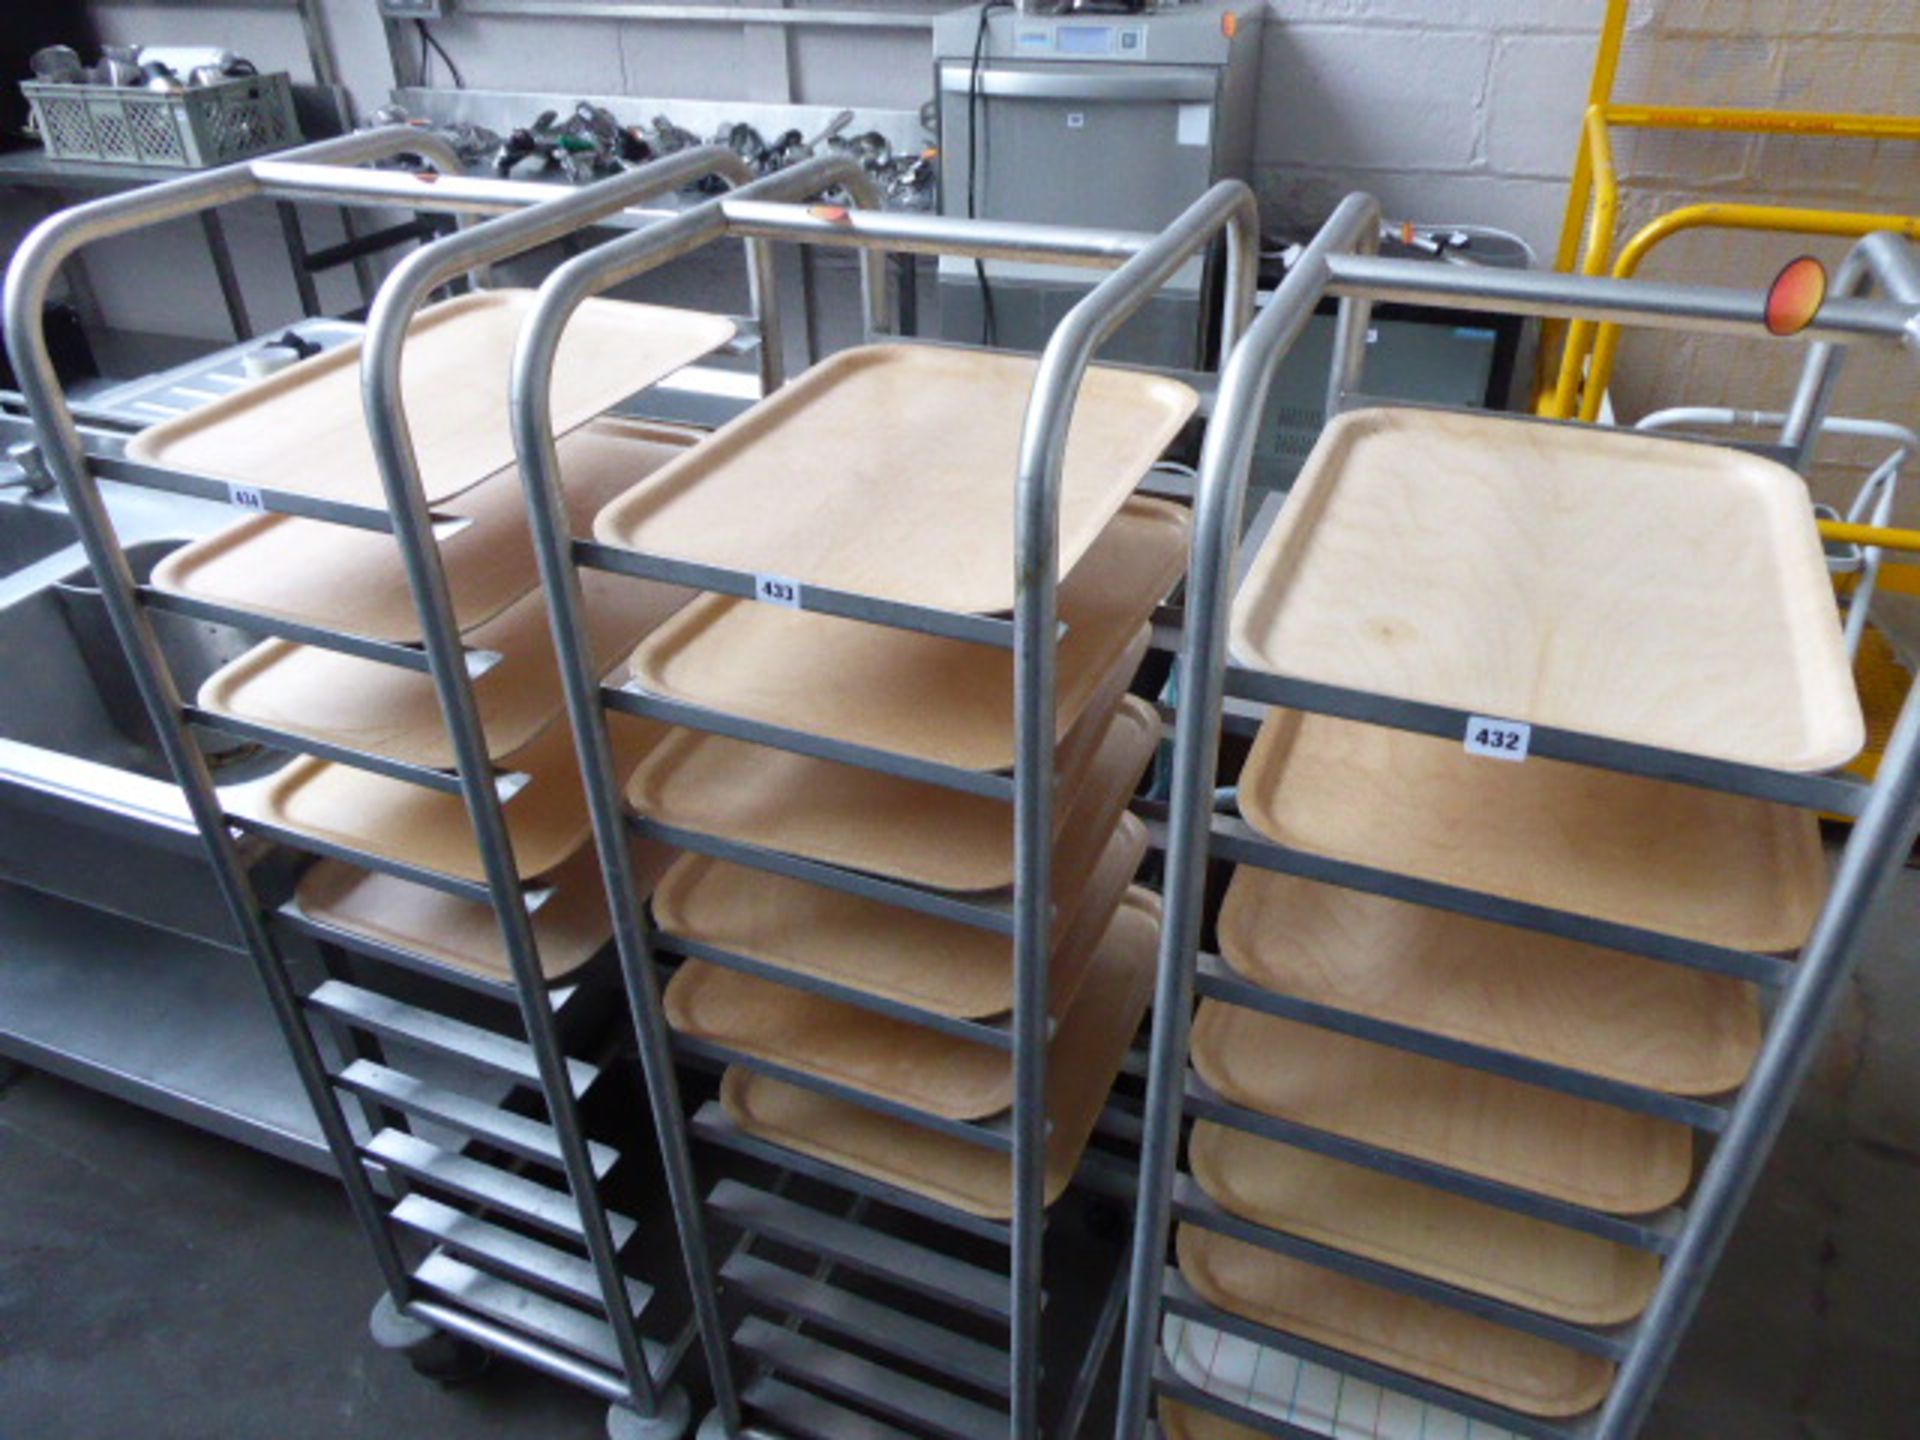 10 shelf mobile clearing trolley with trays